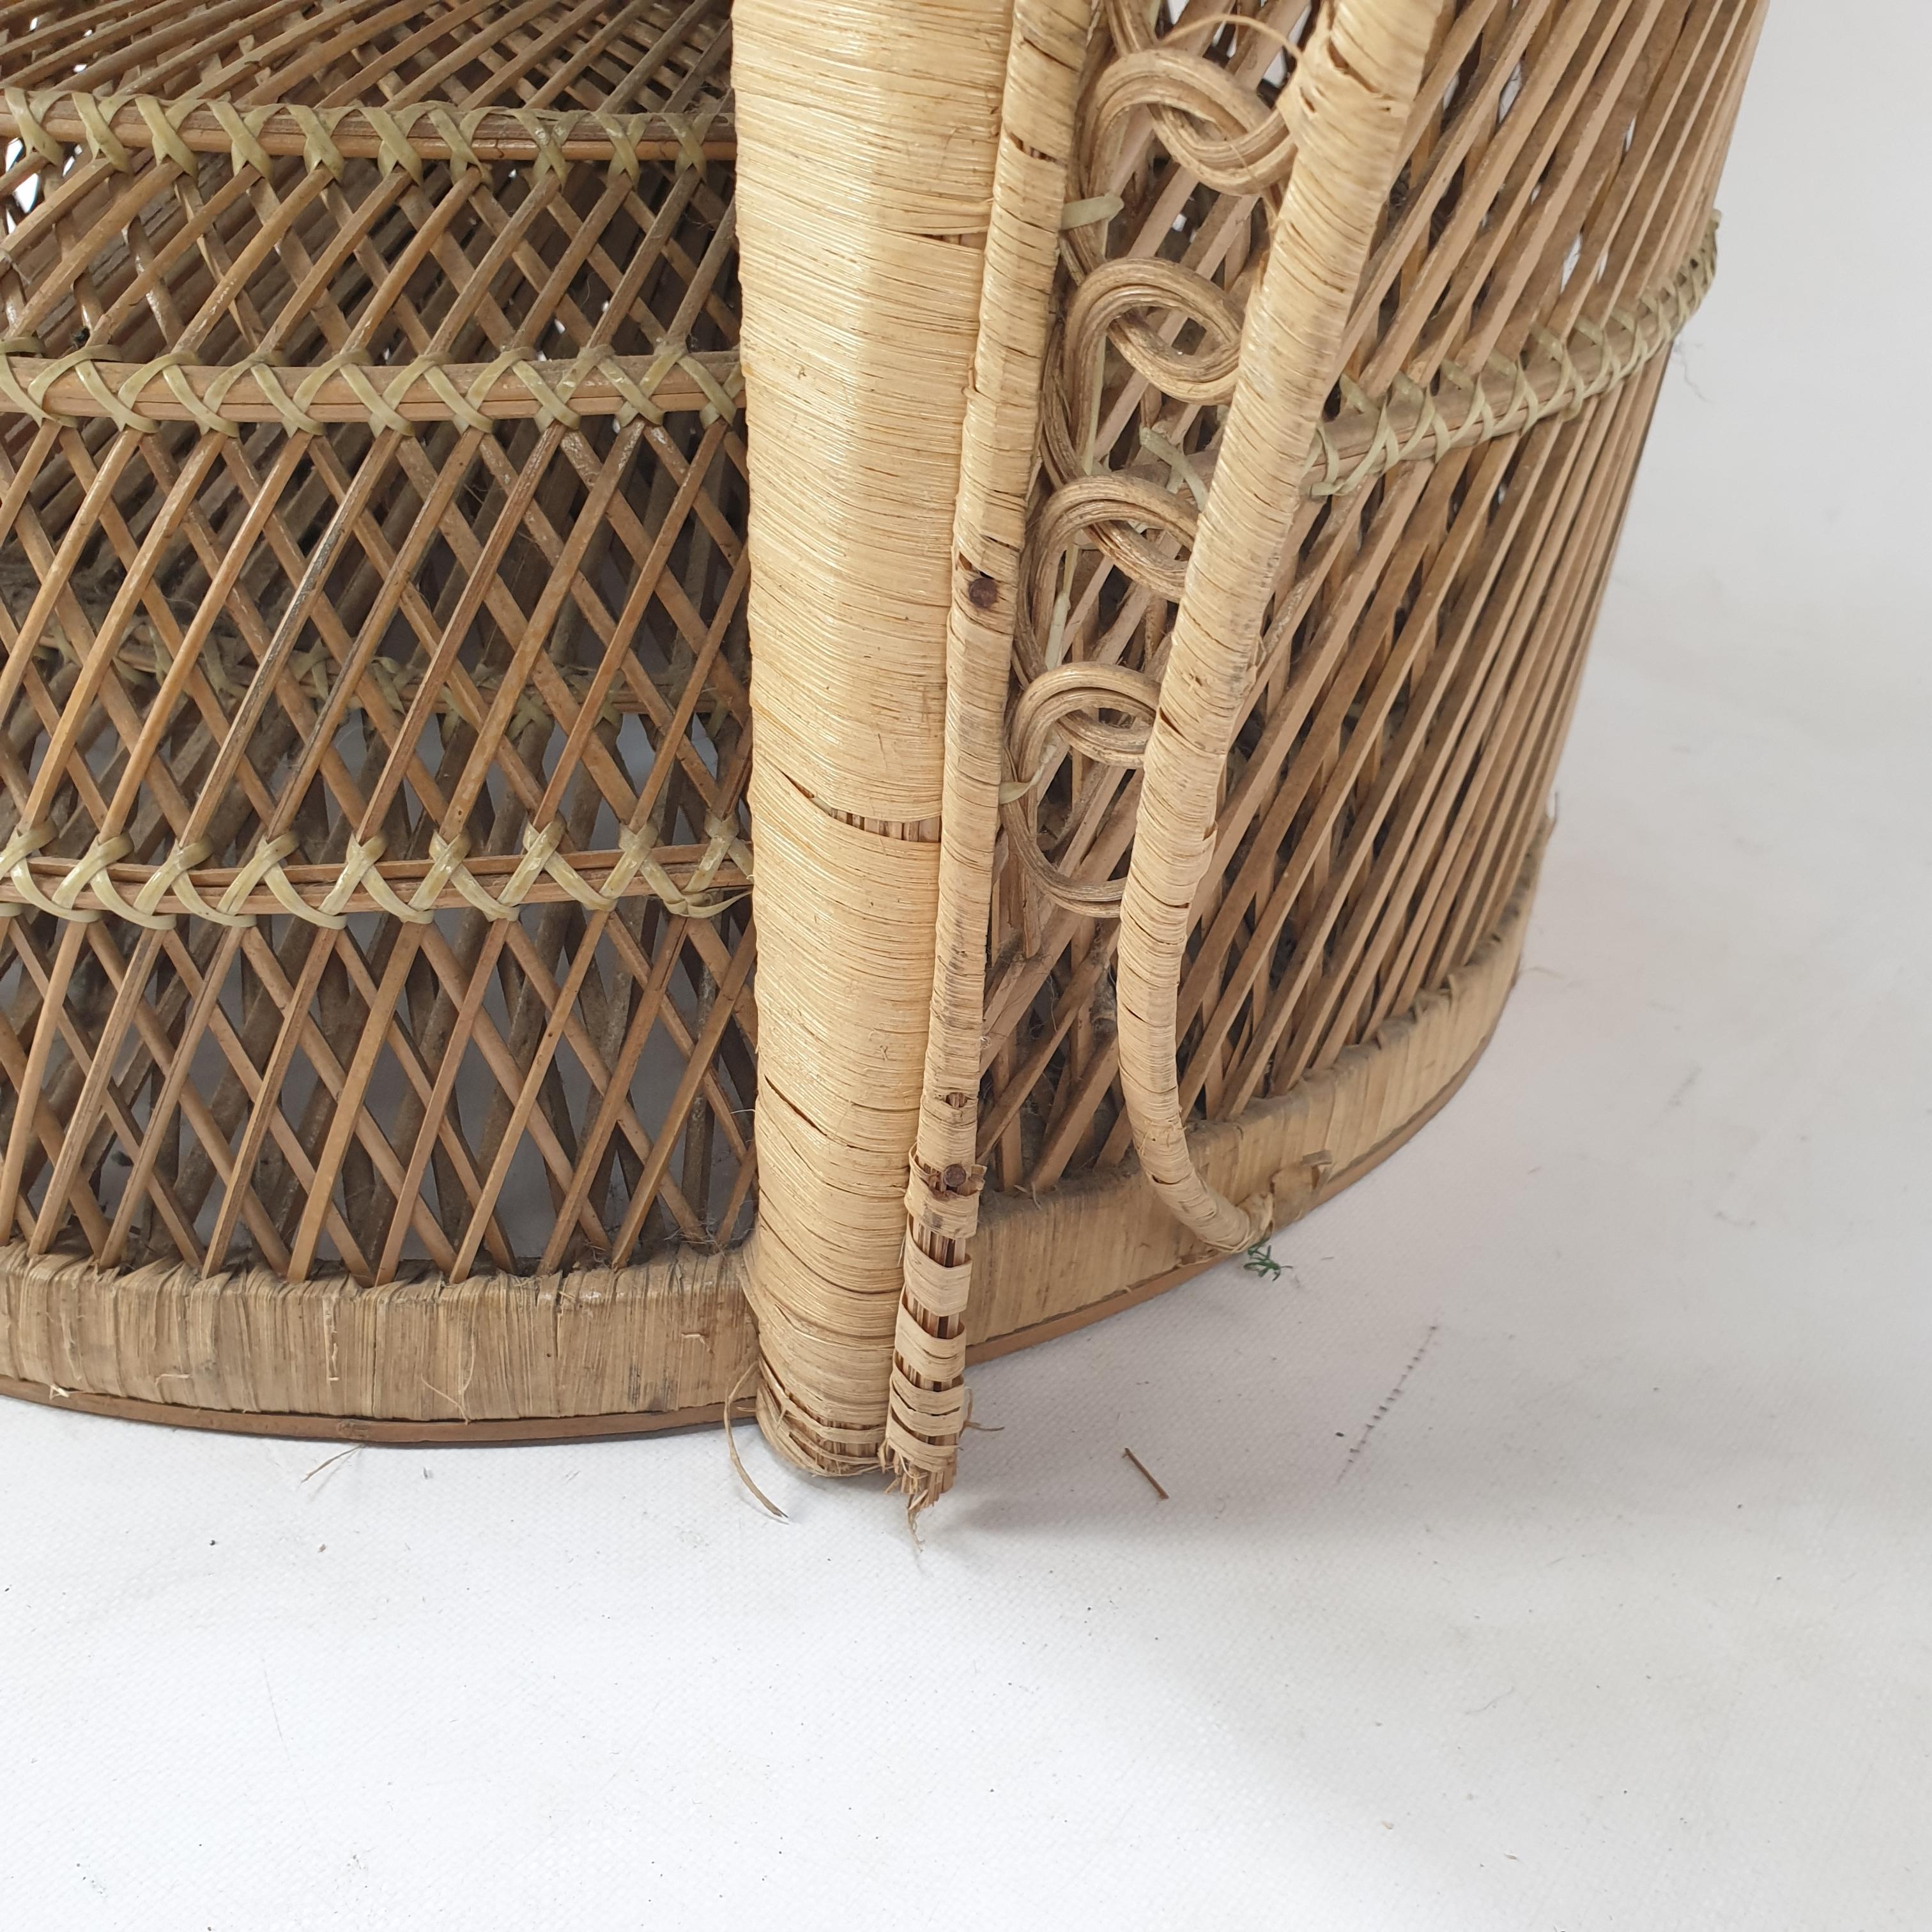 Midcentury Emmanuelle or Peacock Rattan and Wicker Chair, Italy 1960s For Sale 12